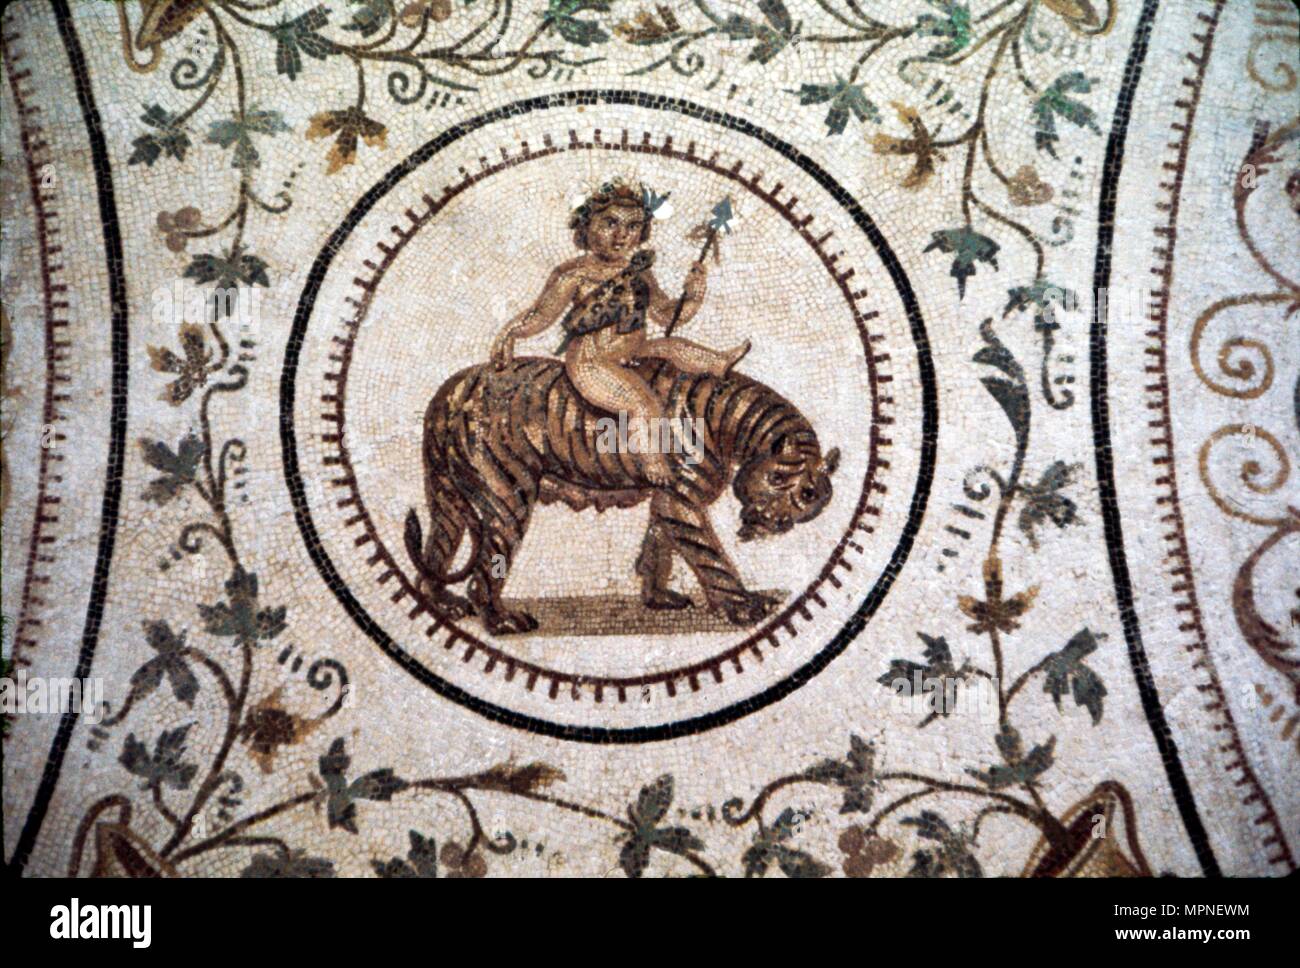 Infant Dionysus Riding on a Tiger, Roman mosaic detail at El Djem, Tunisia. c2nd century.  Artist: Unknown. Stock Photo